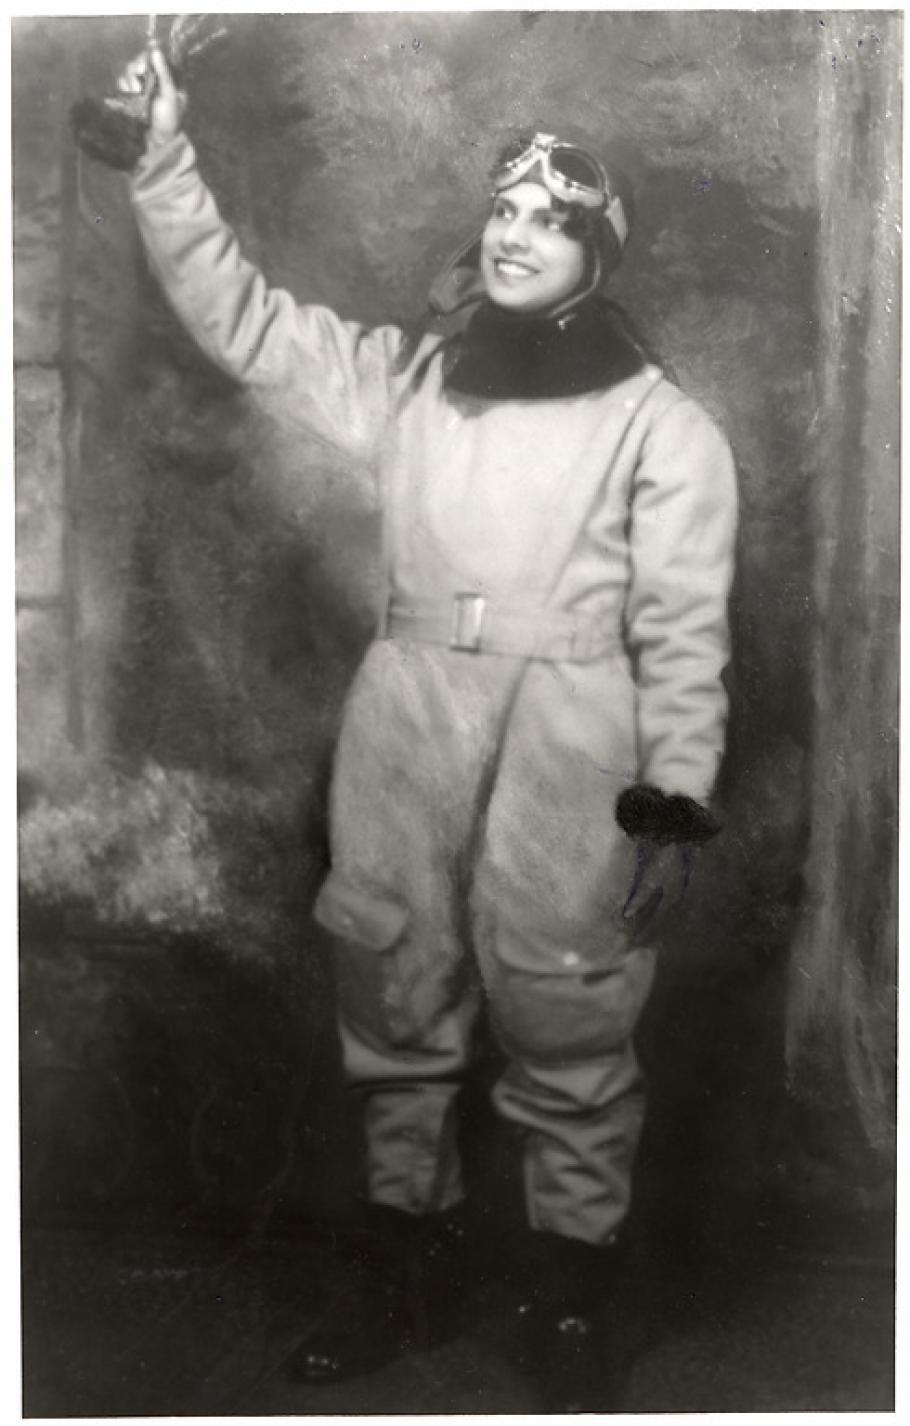 A woman in a flying suit raises her hand in the air.